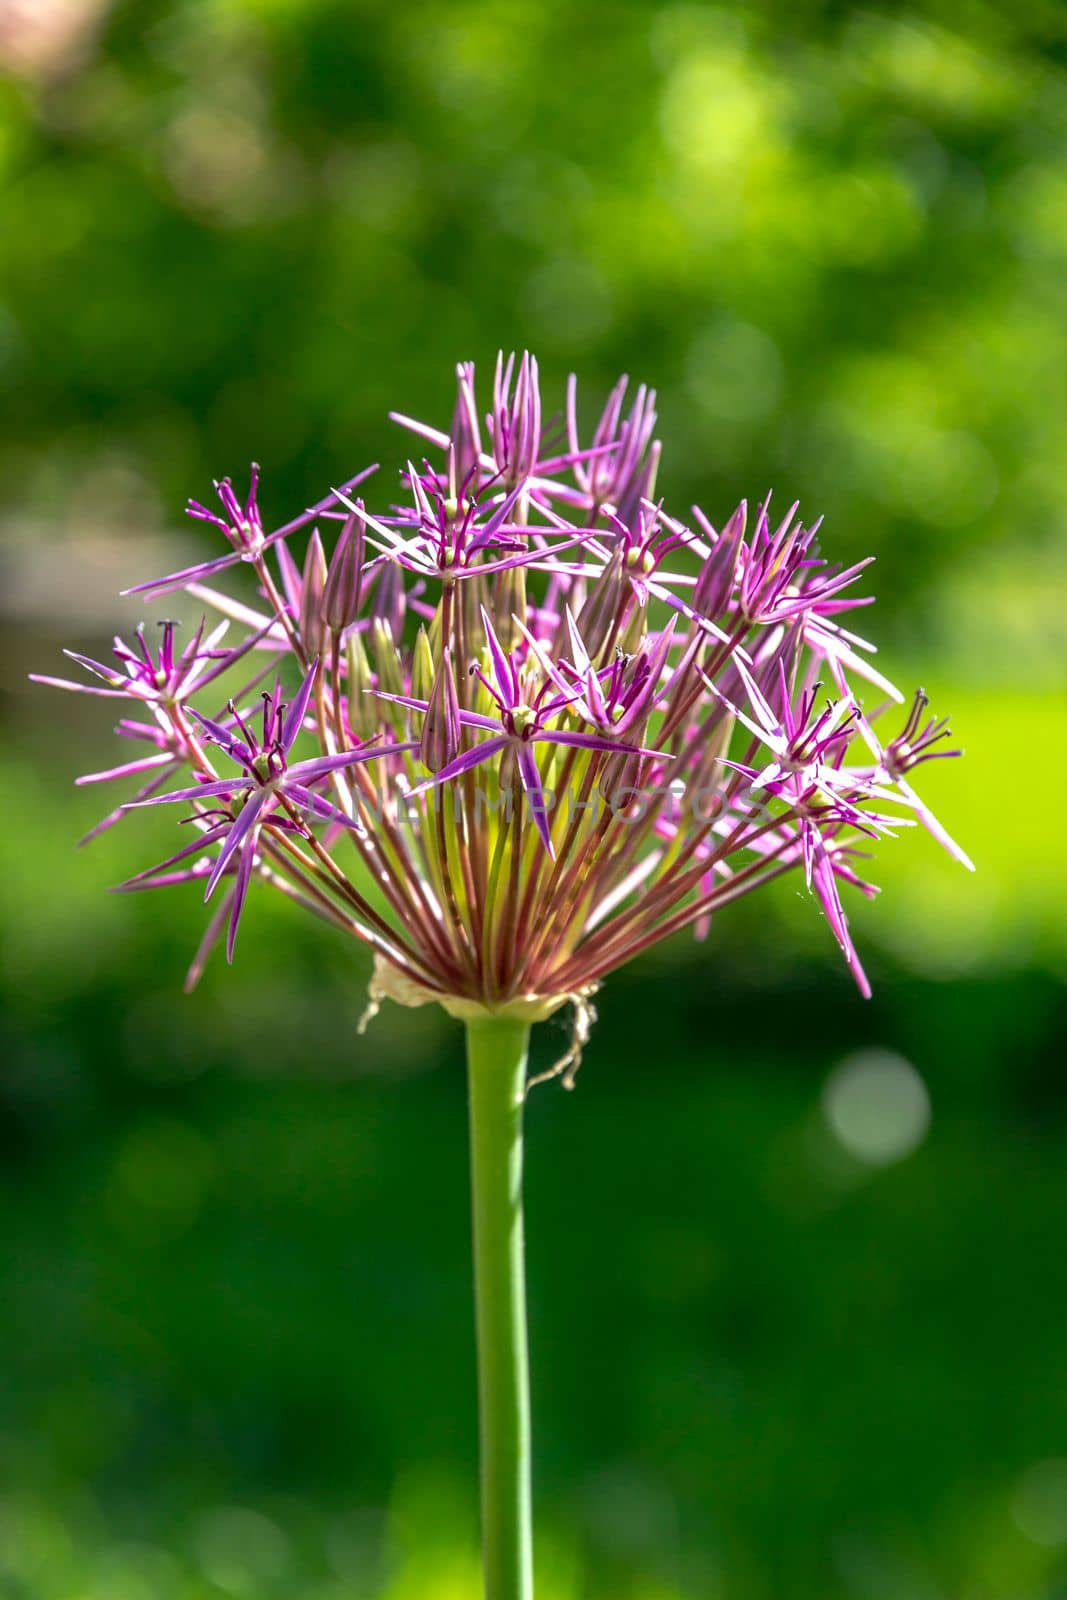 Vertical view of blooming Persian onion or star of Persia flower.